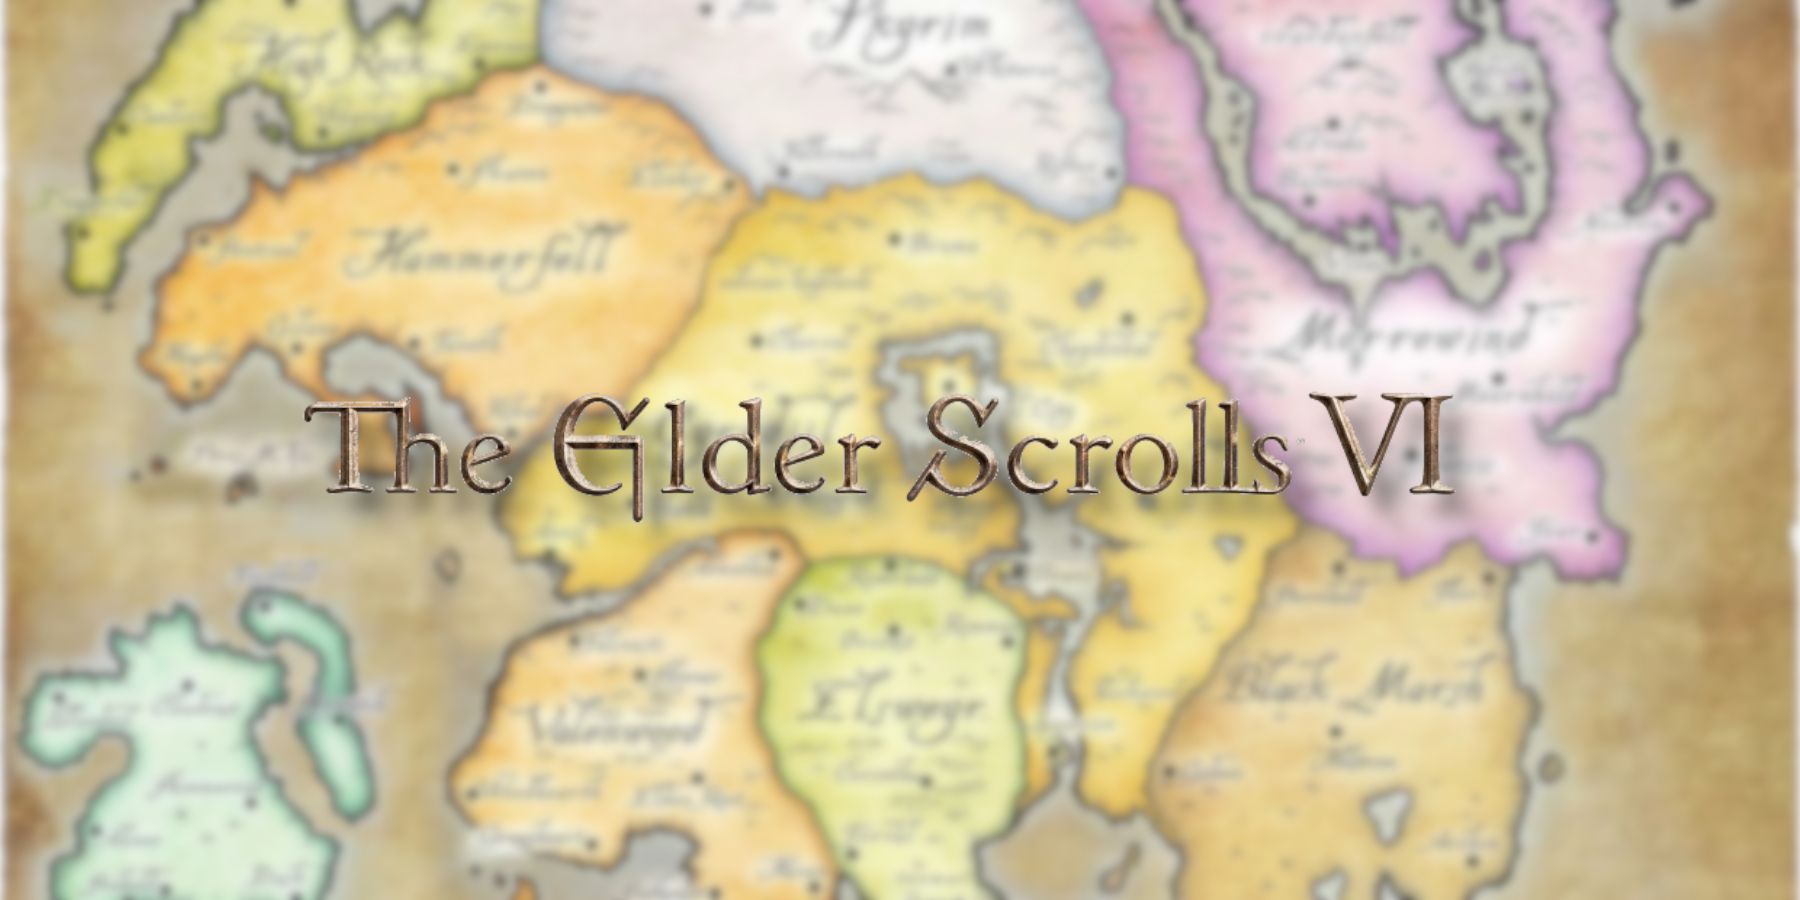 An image of the Tamriel map in the background with the Elder Scrolls 6 logo in the foreground.